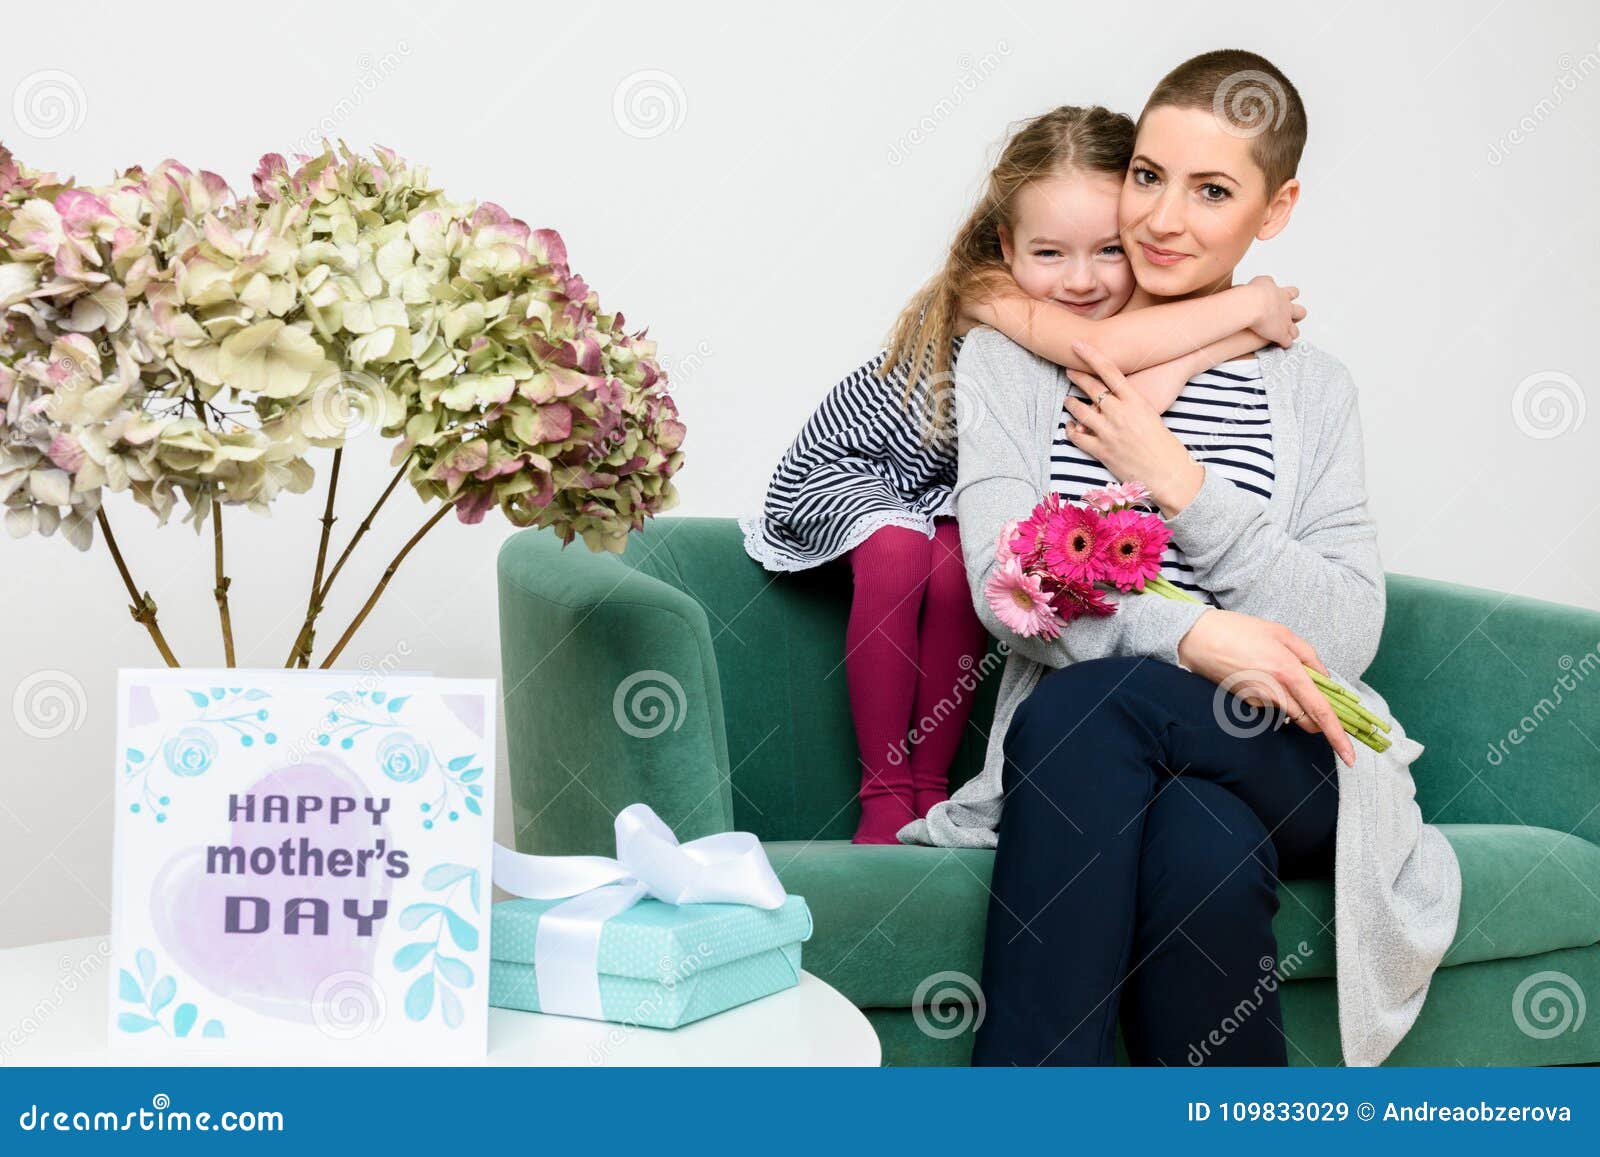 happy mother`s day. cute little girl congratulating mom to mothers day. mother and daughter.